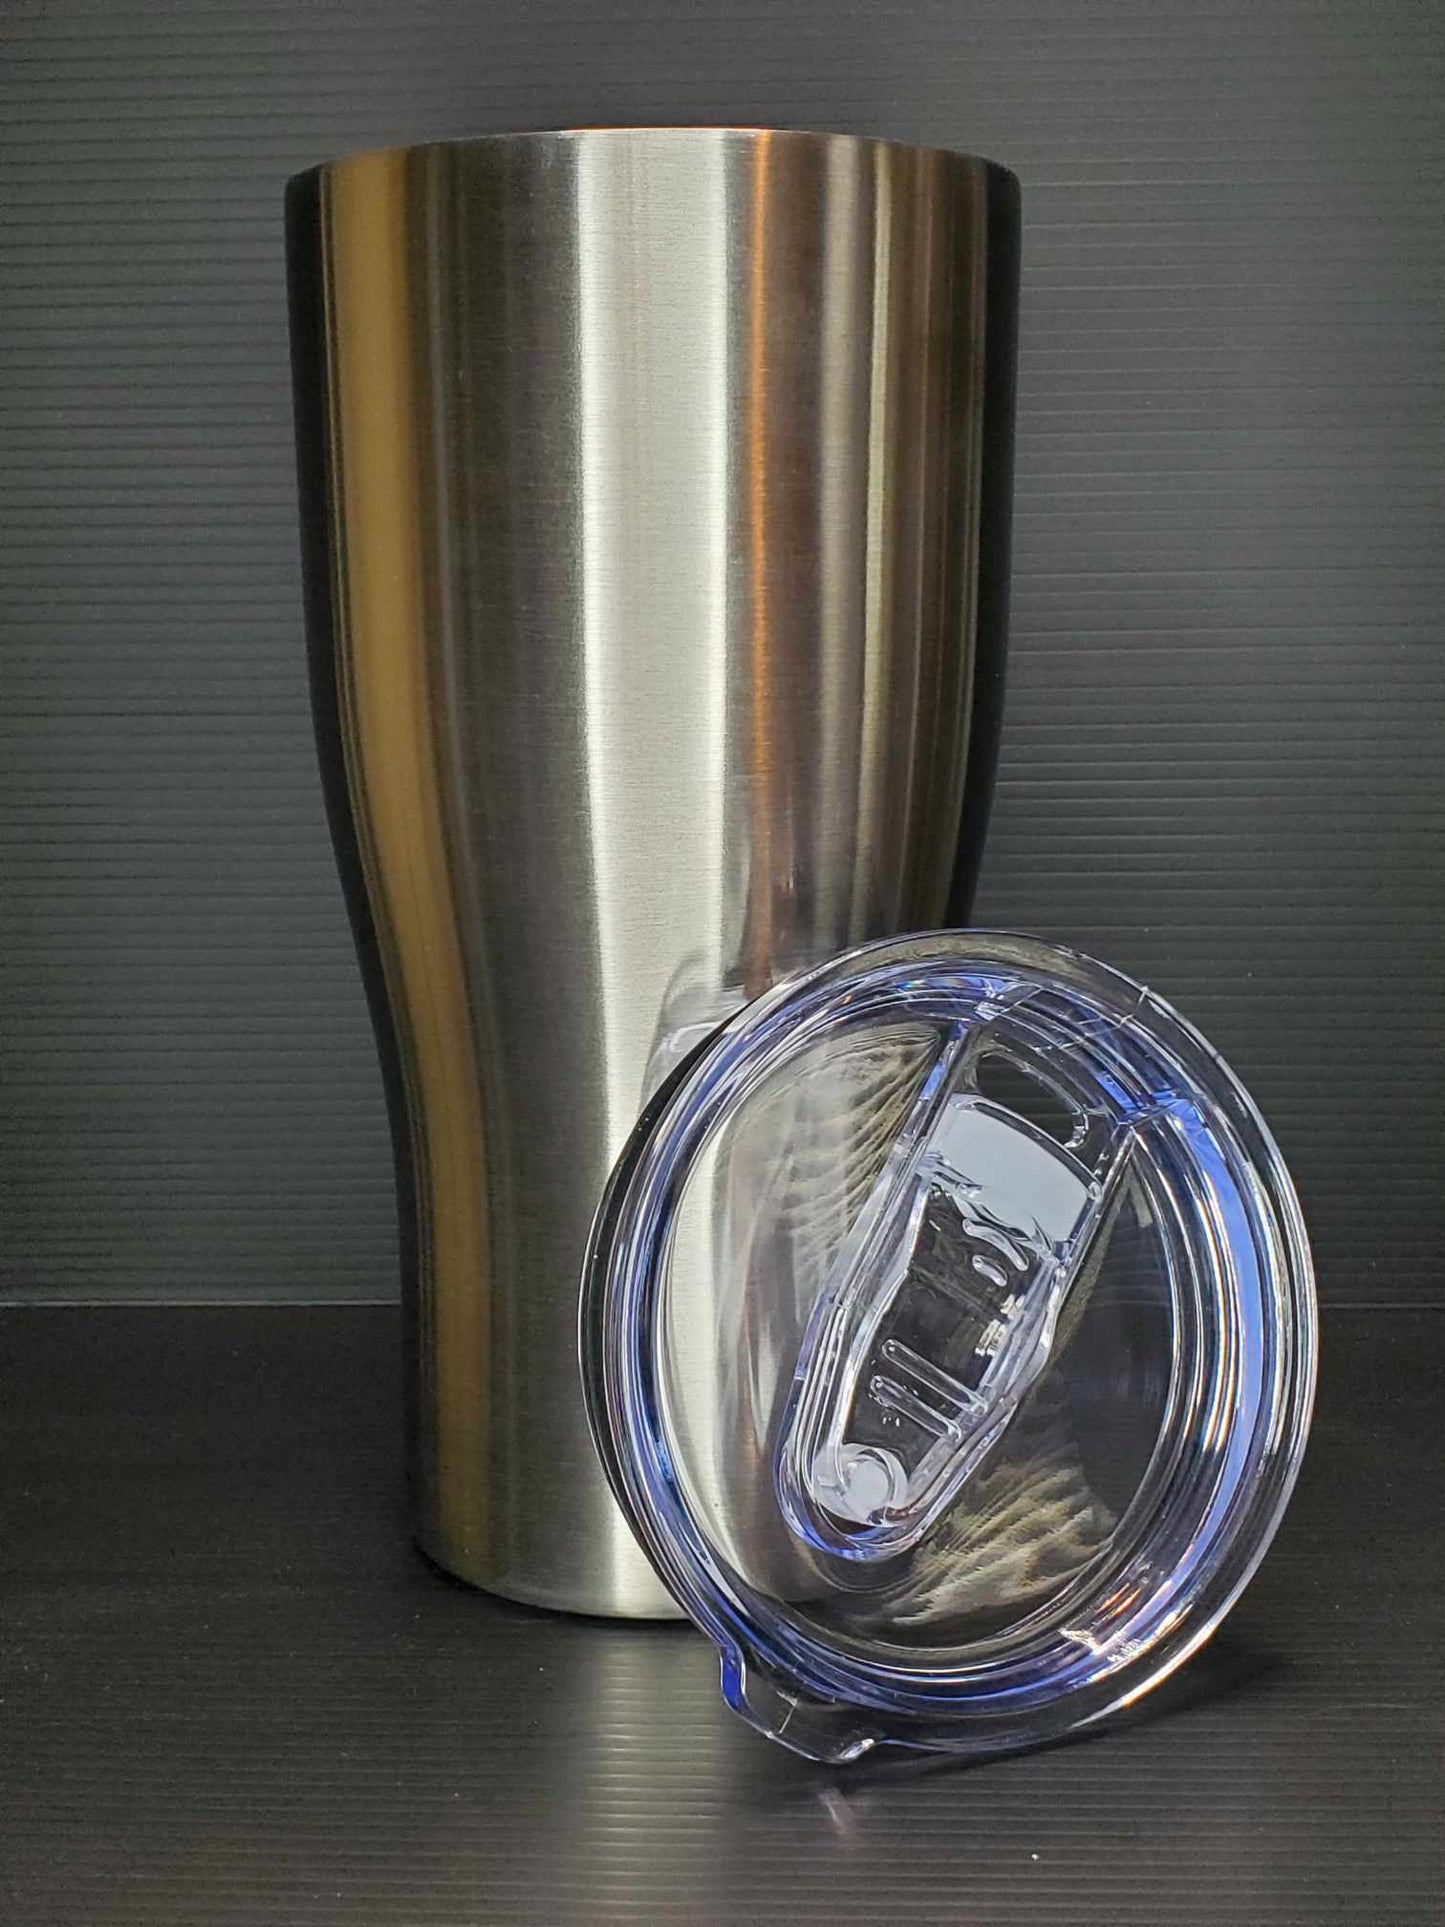 30 oz Modern Curve With Lid